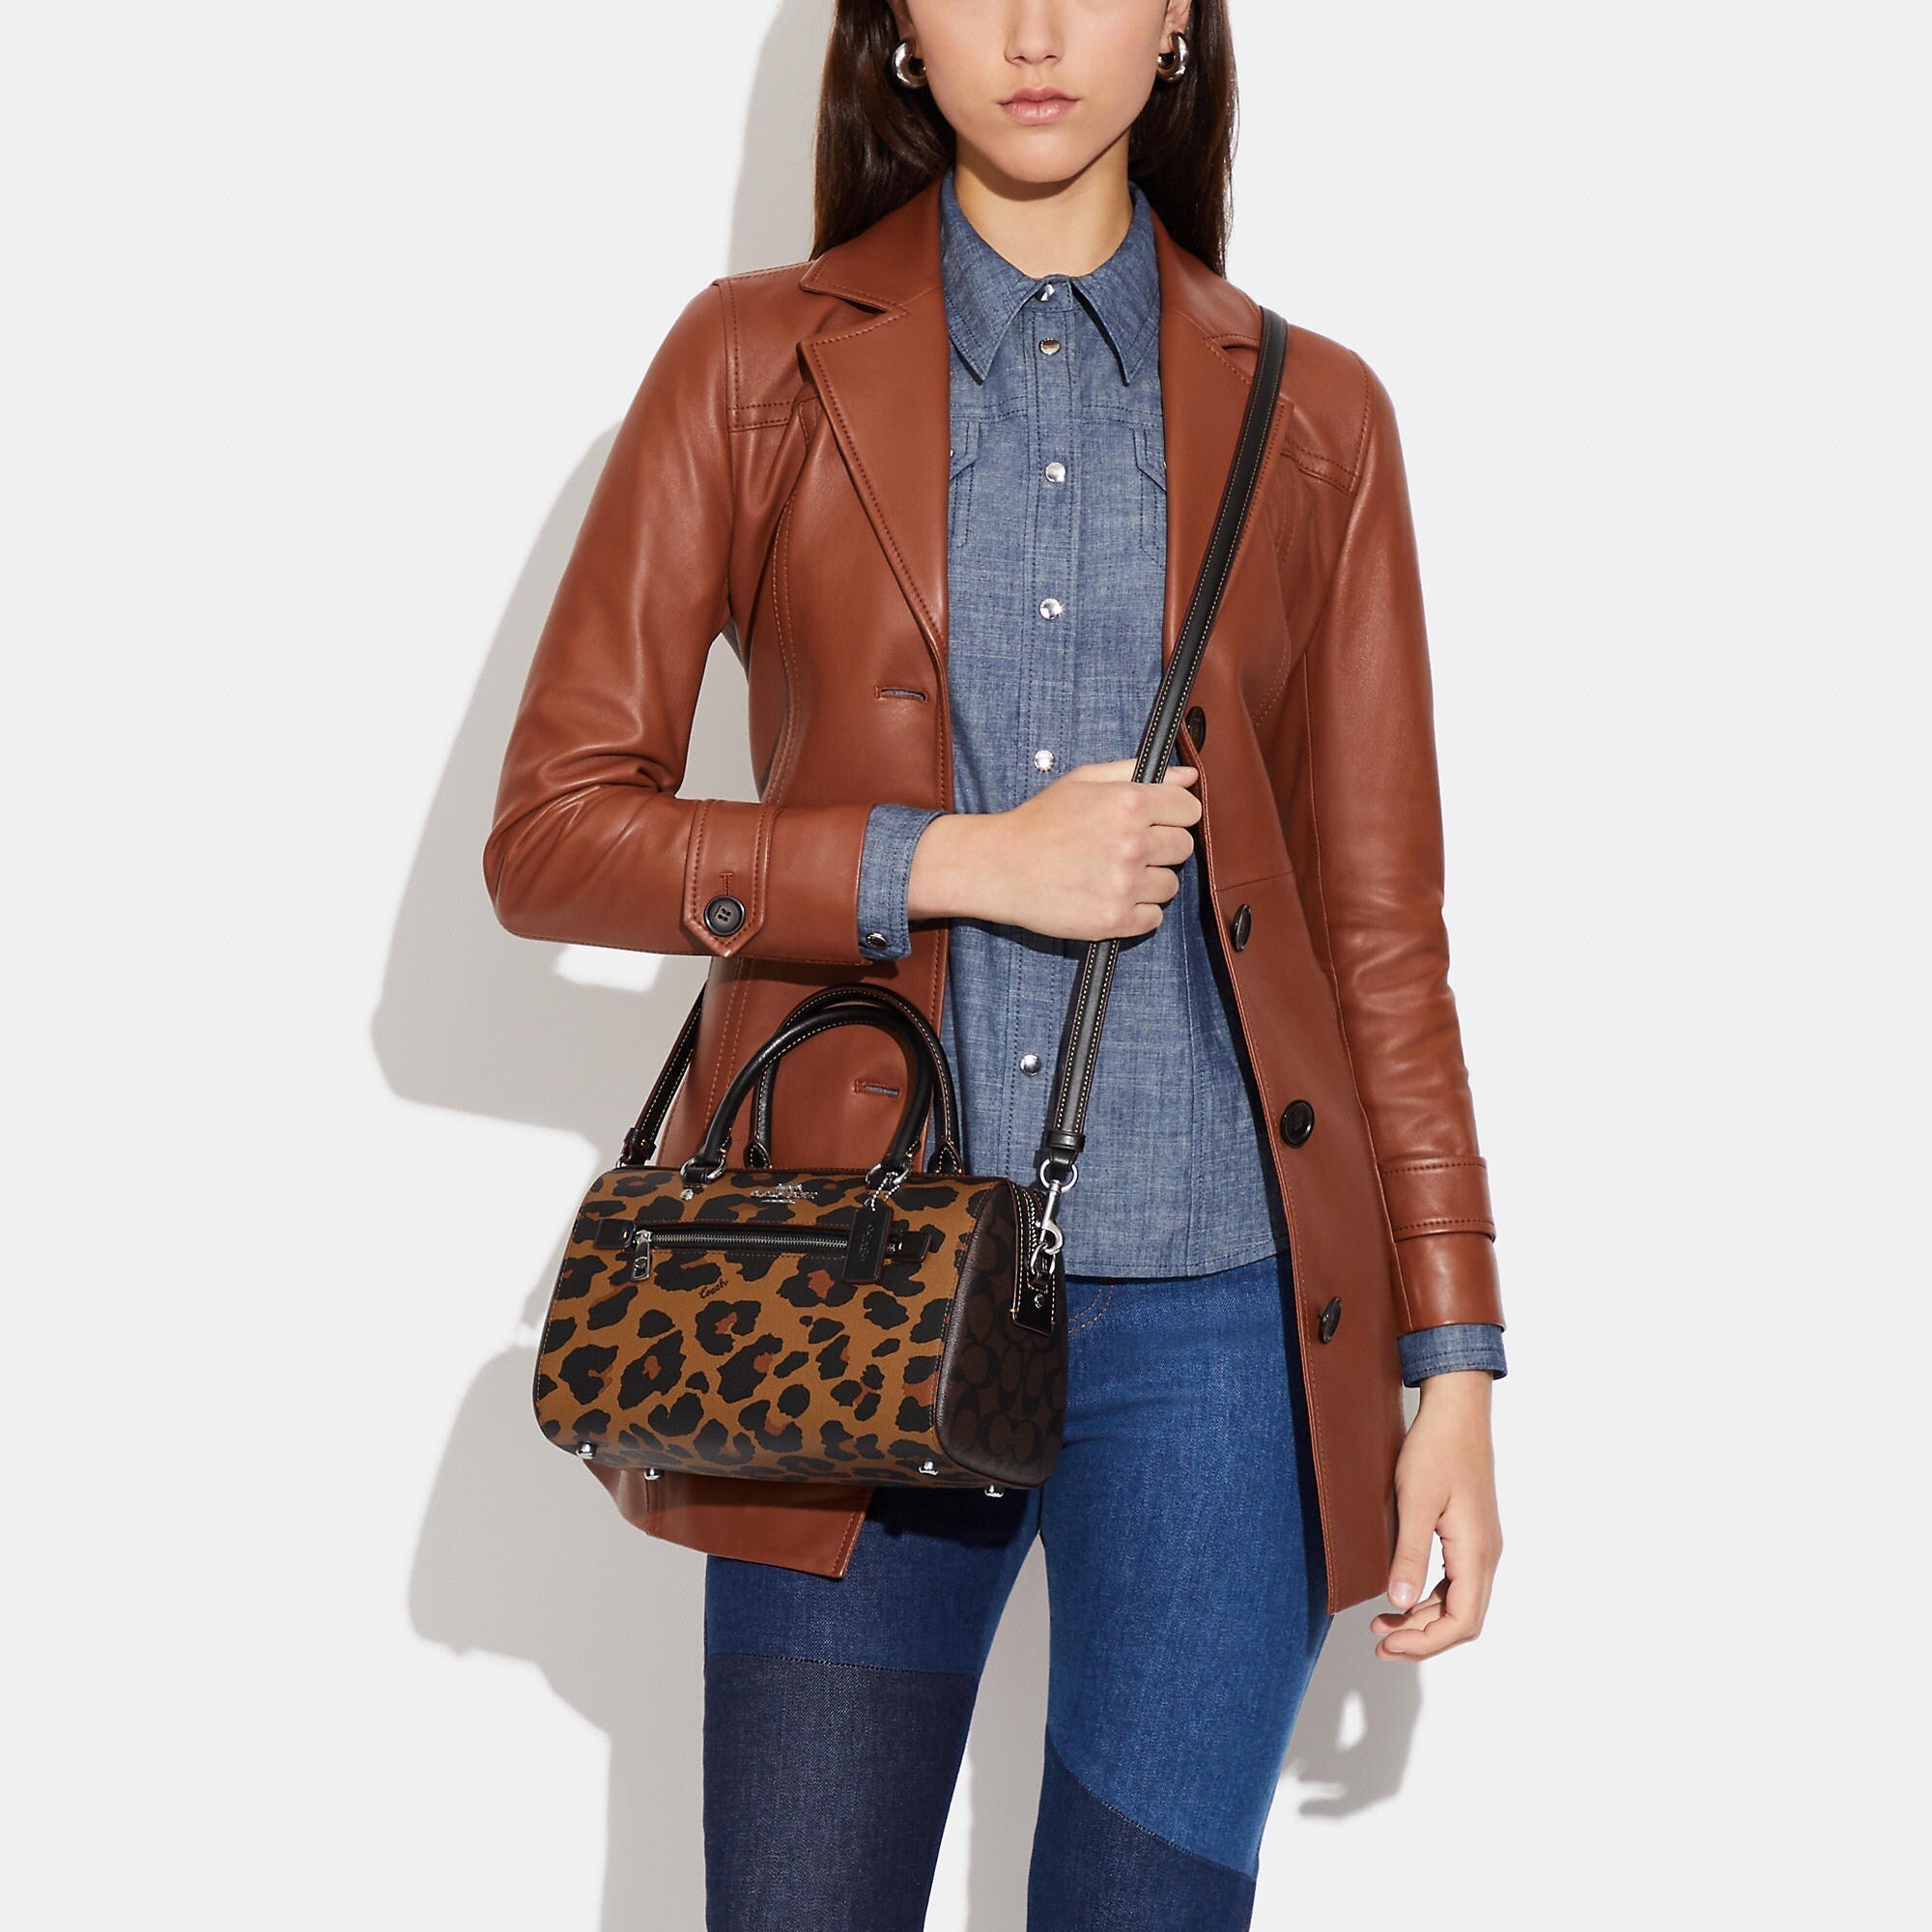 Coach Outlet Rowan Satchel In Signature Canvas With Leopard Print - TJ Outlet